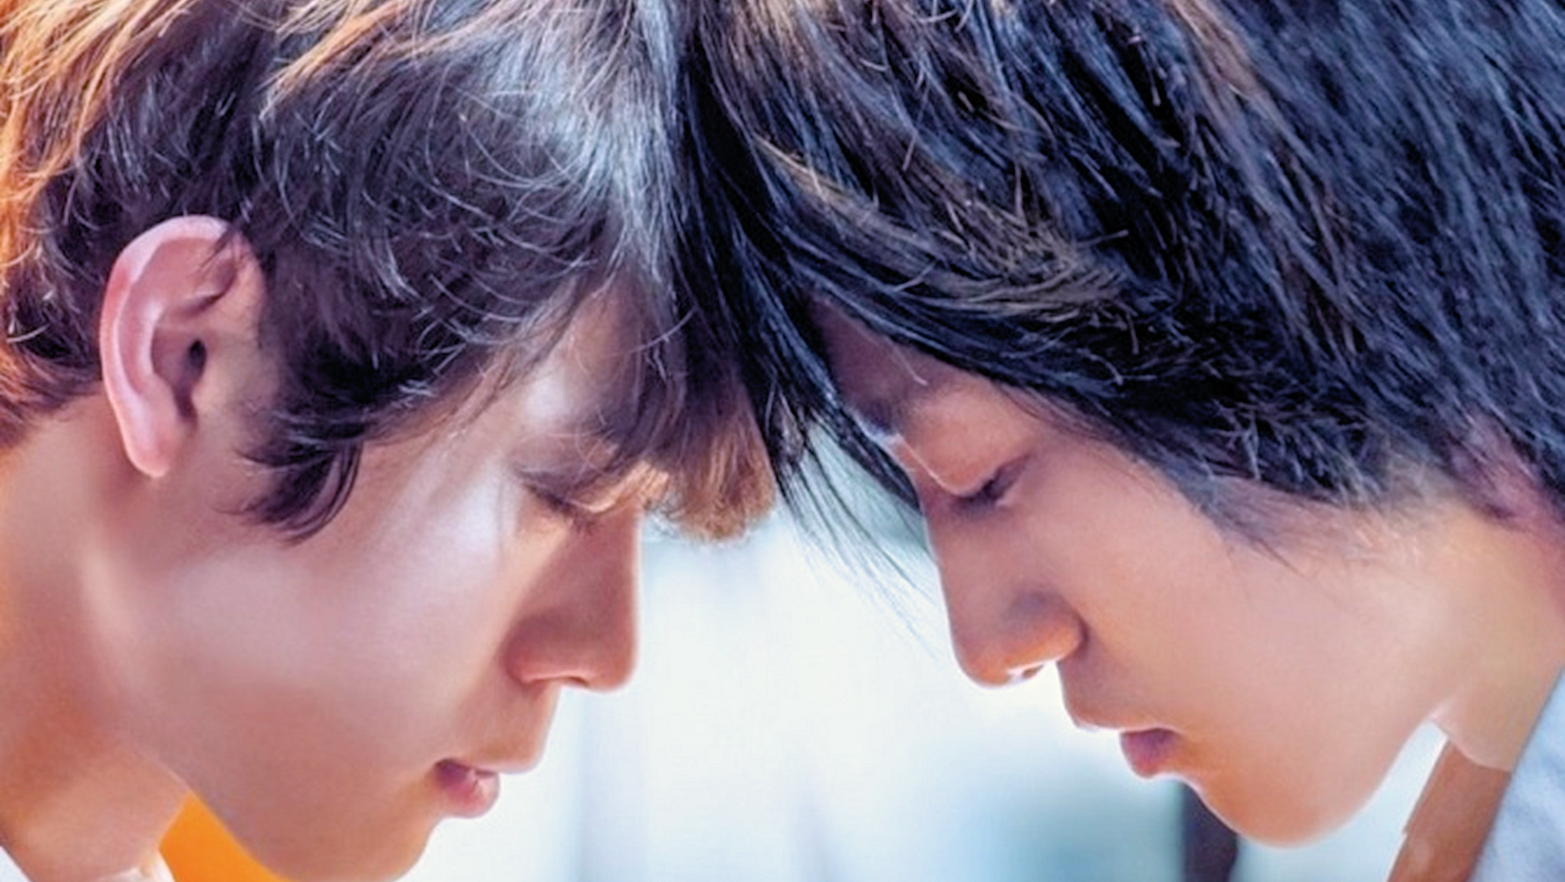 His (Japanese LGBTQ+ Movie) [Review]